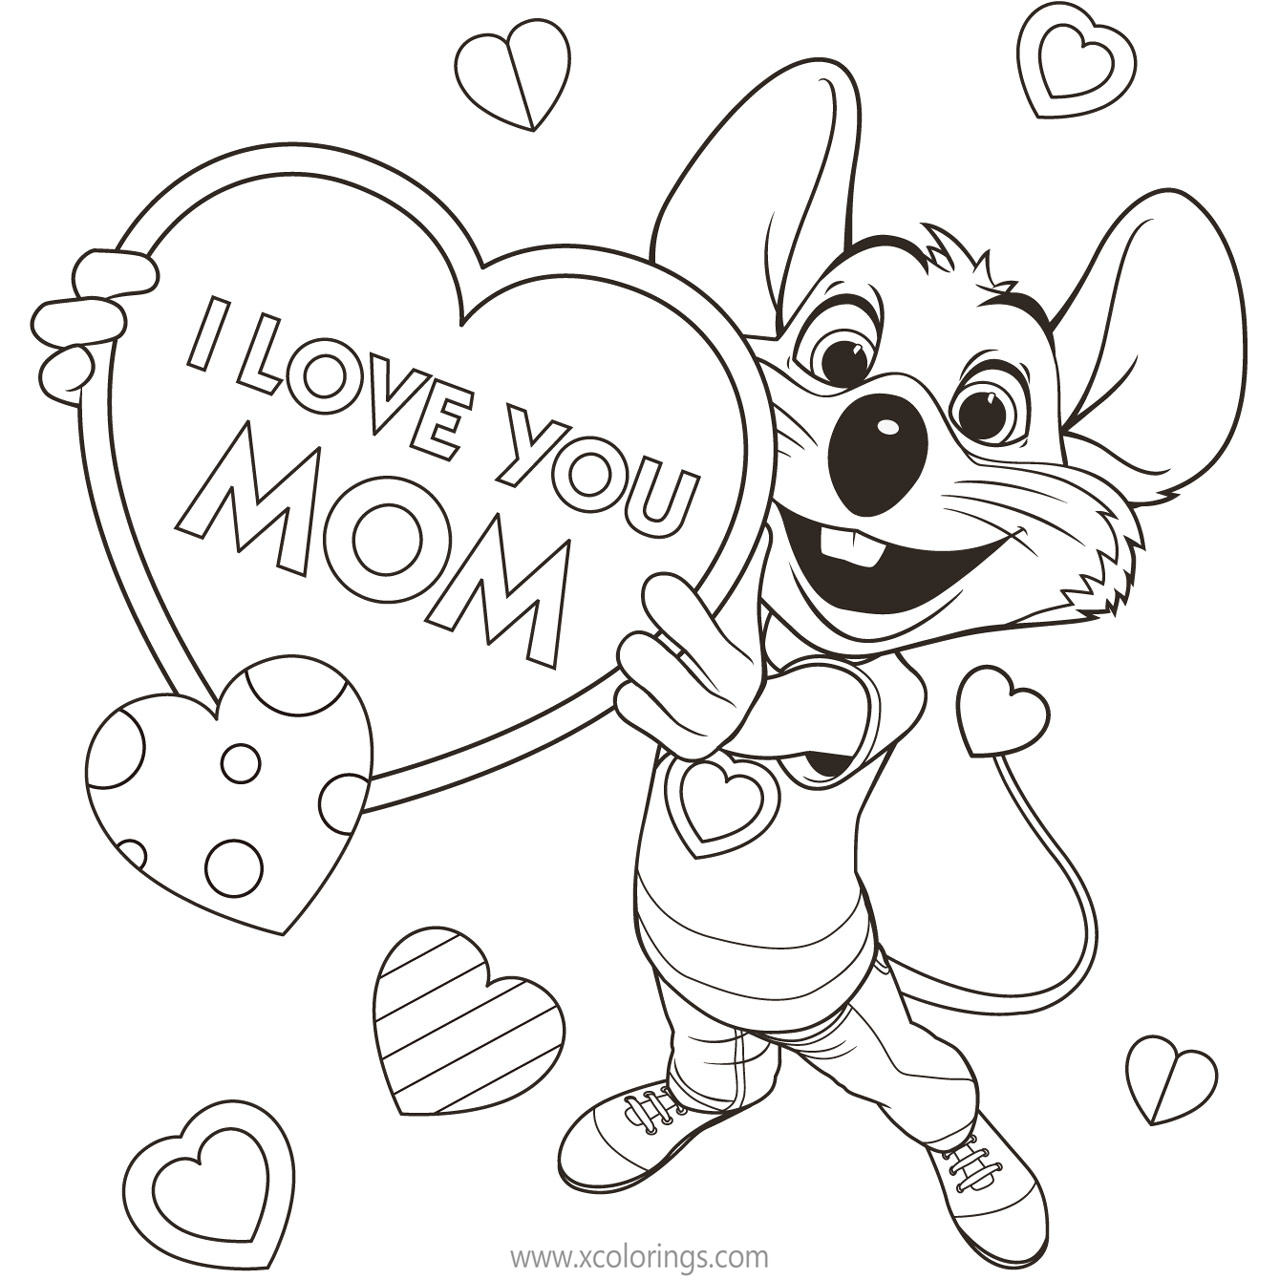 Free Chuck E Cheese Coloring Pages Mother's Day printable